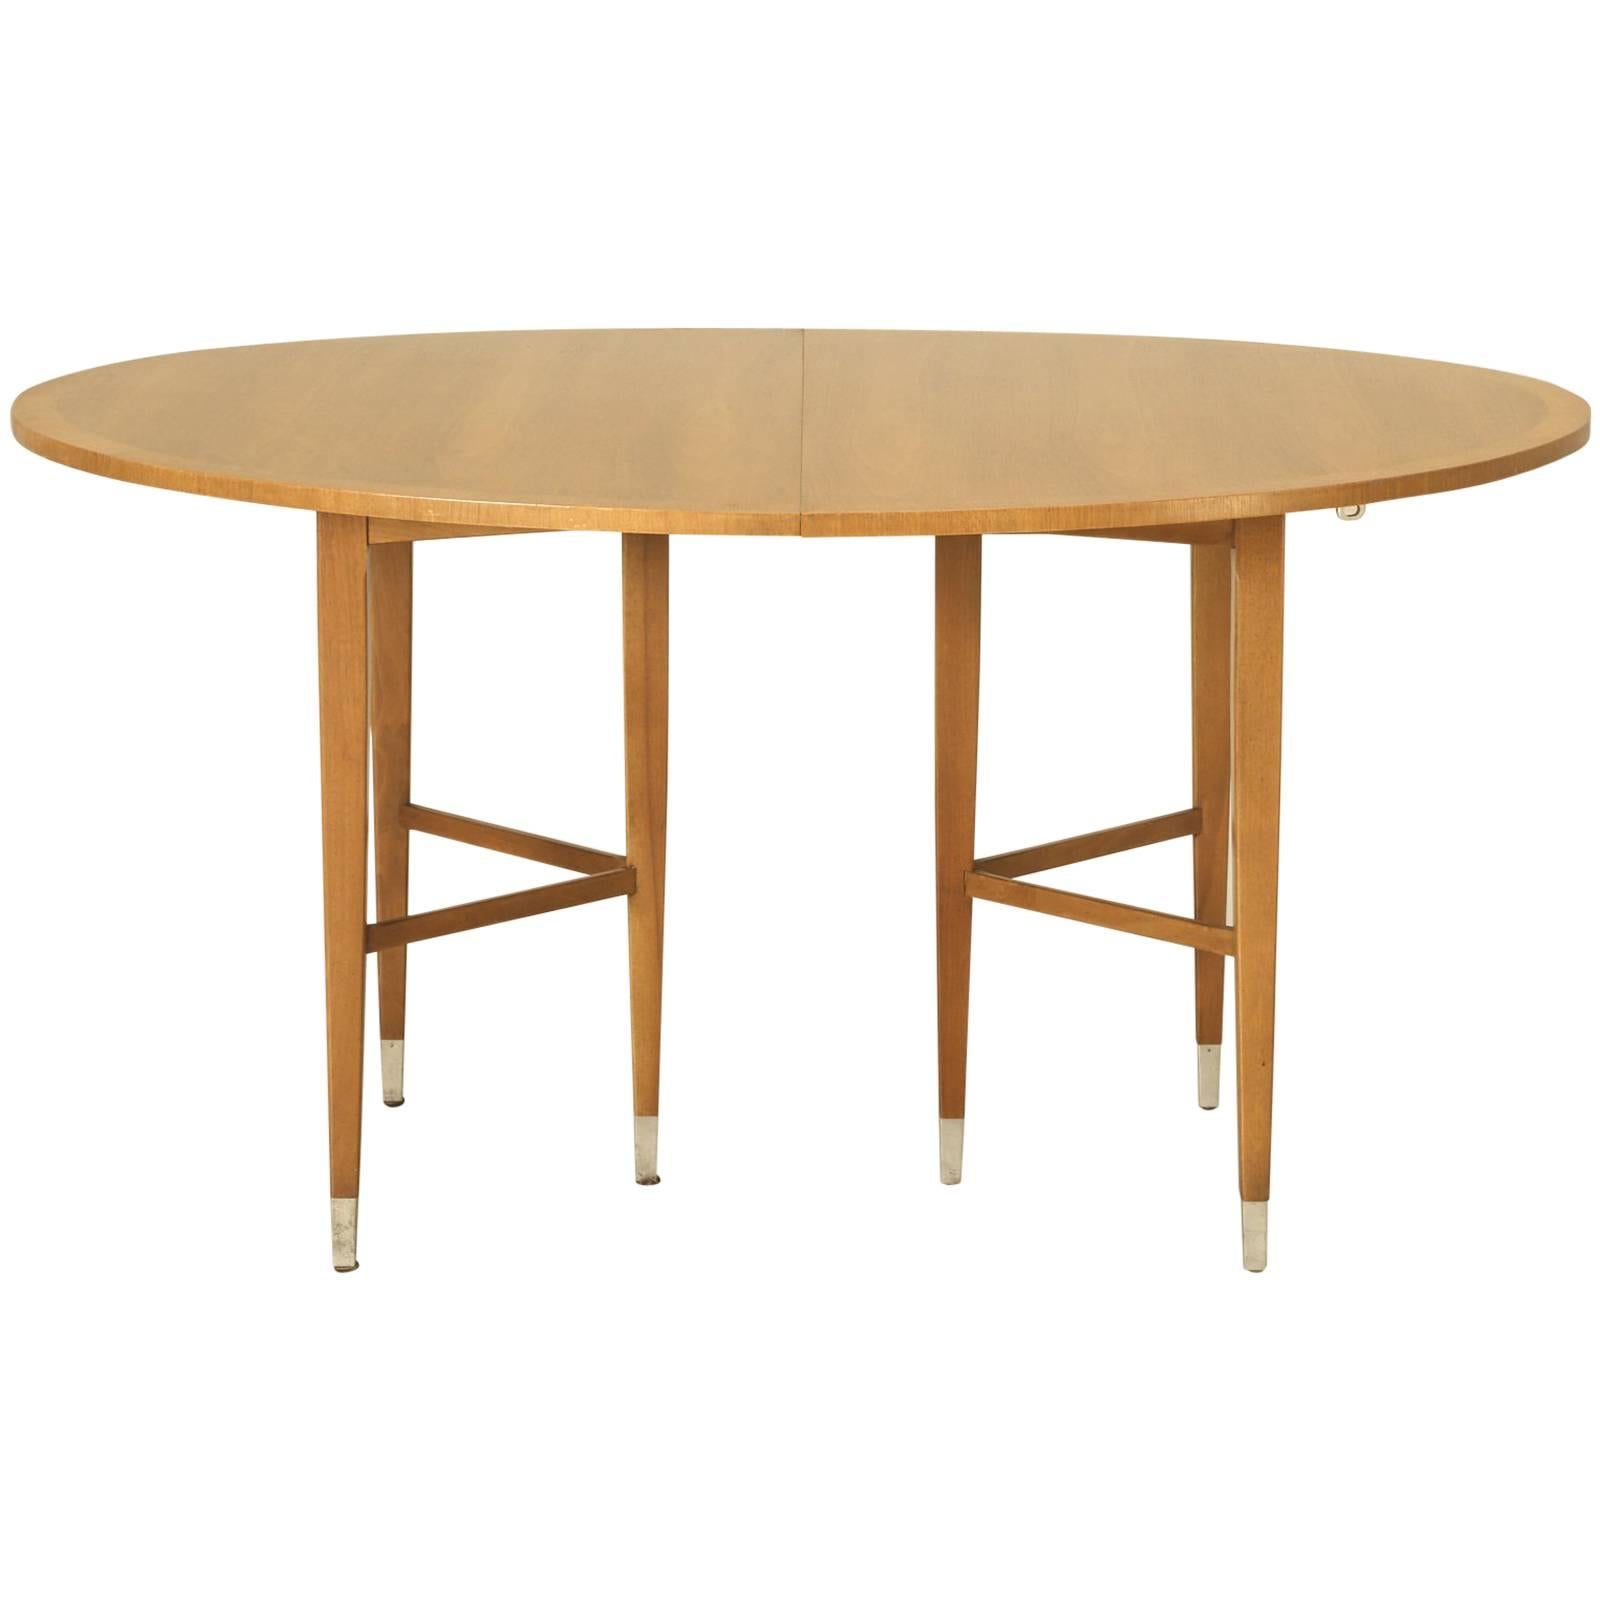 Mid-Century Modern Dining Table by the Sligh Furniture Company